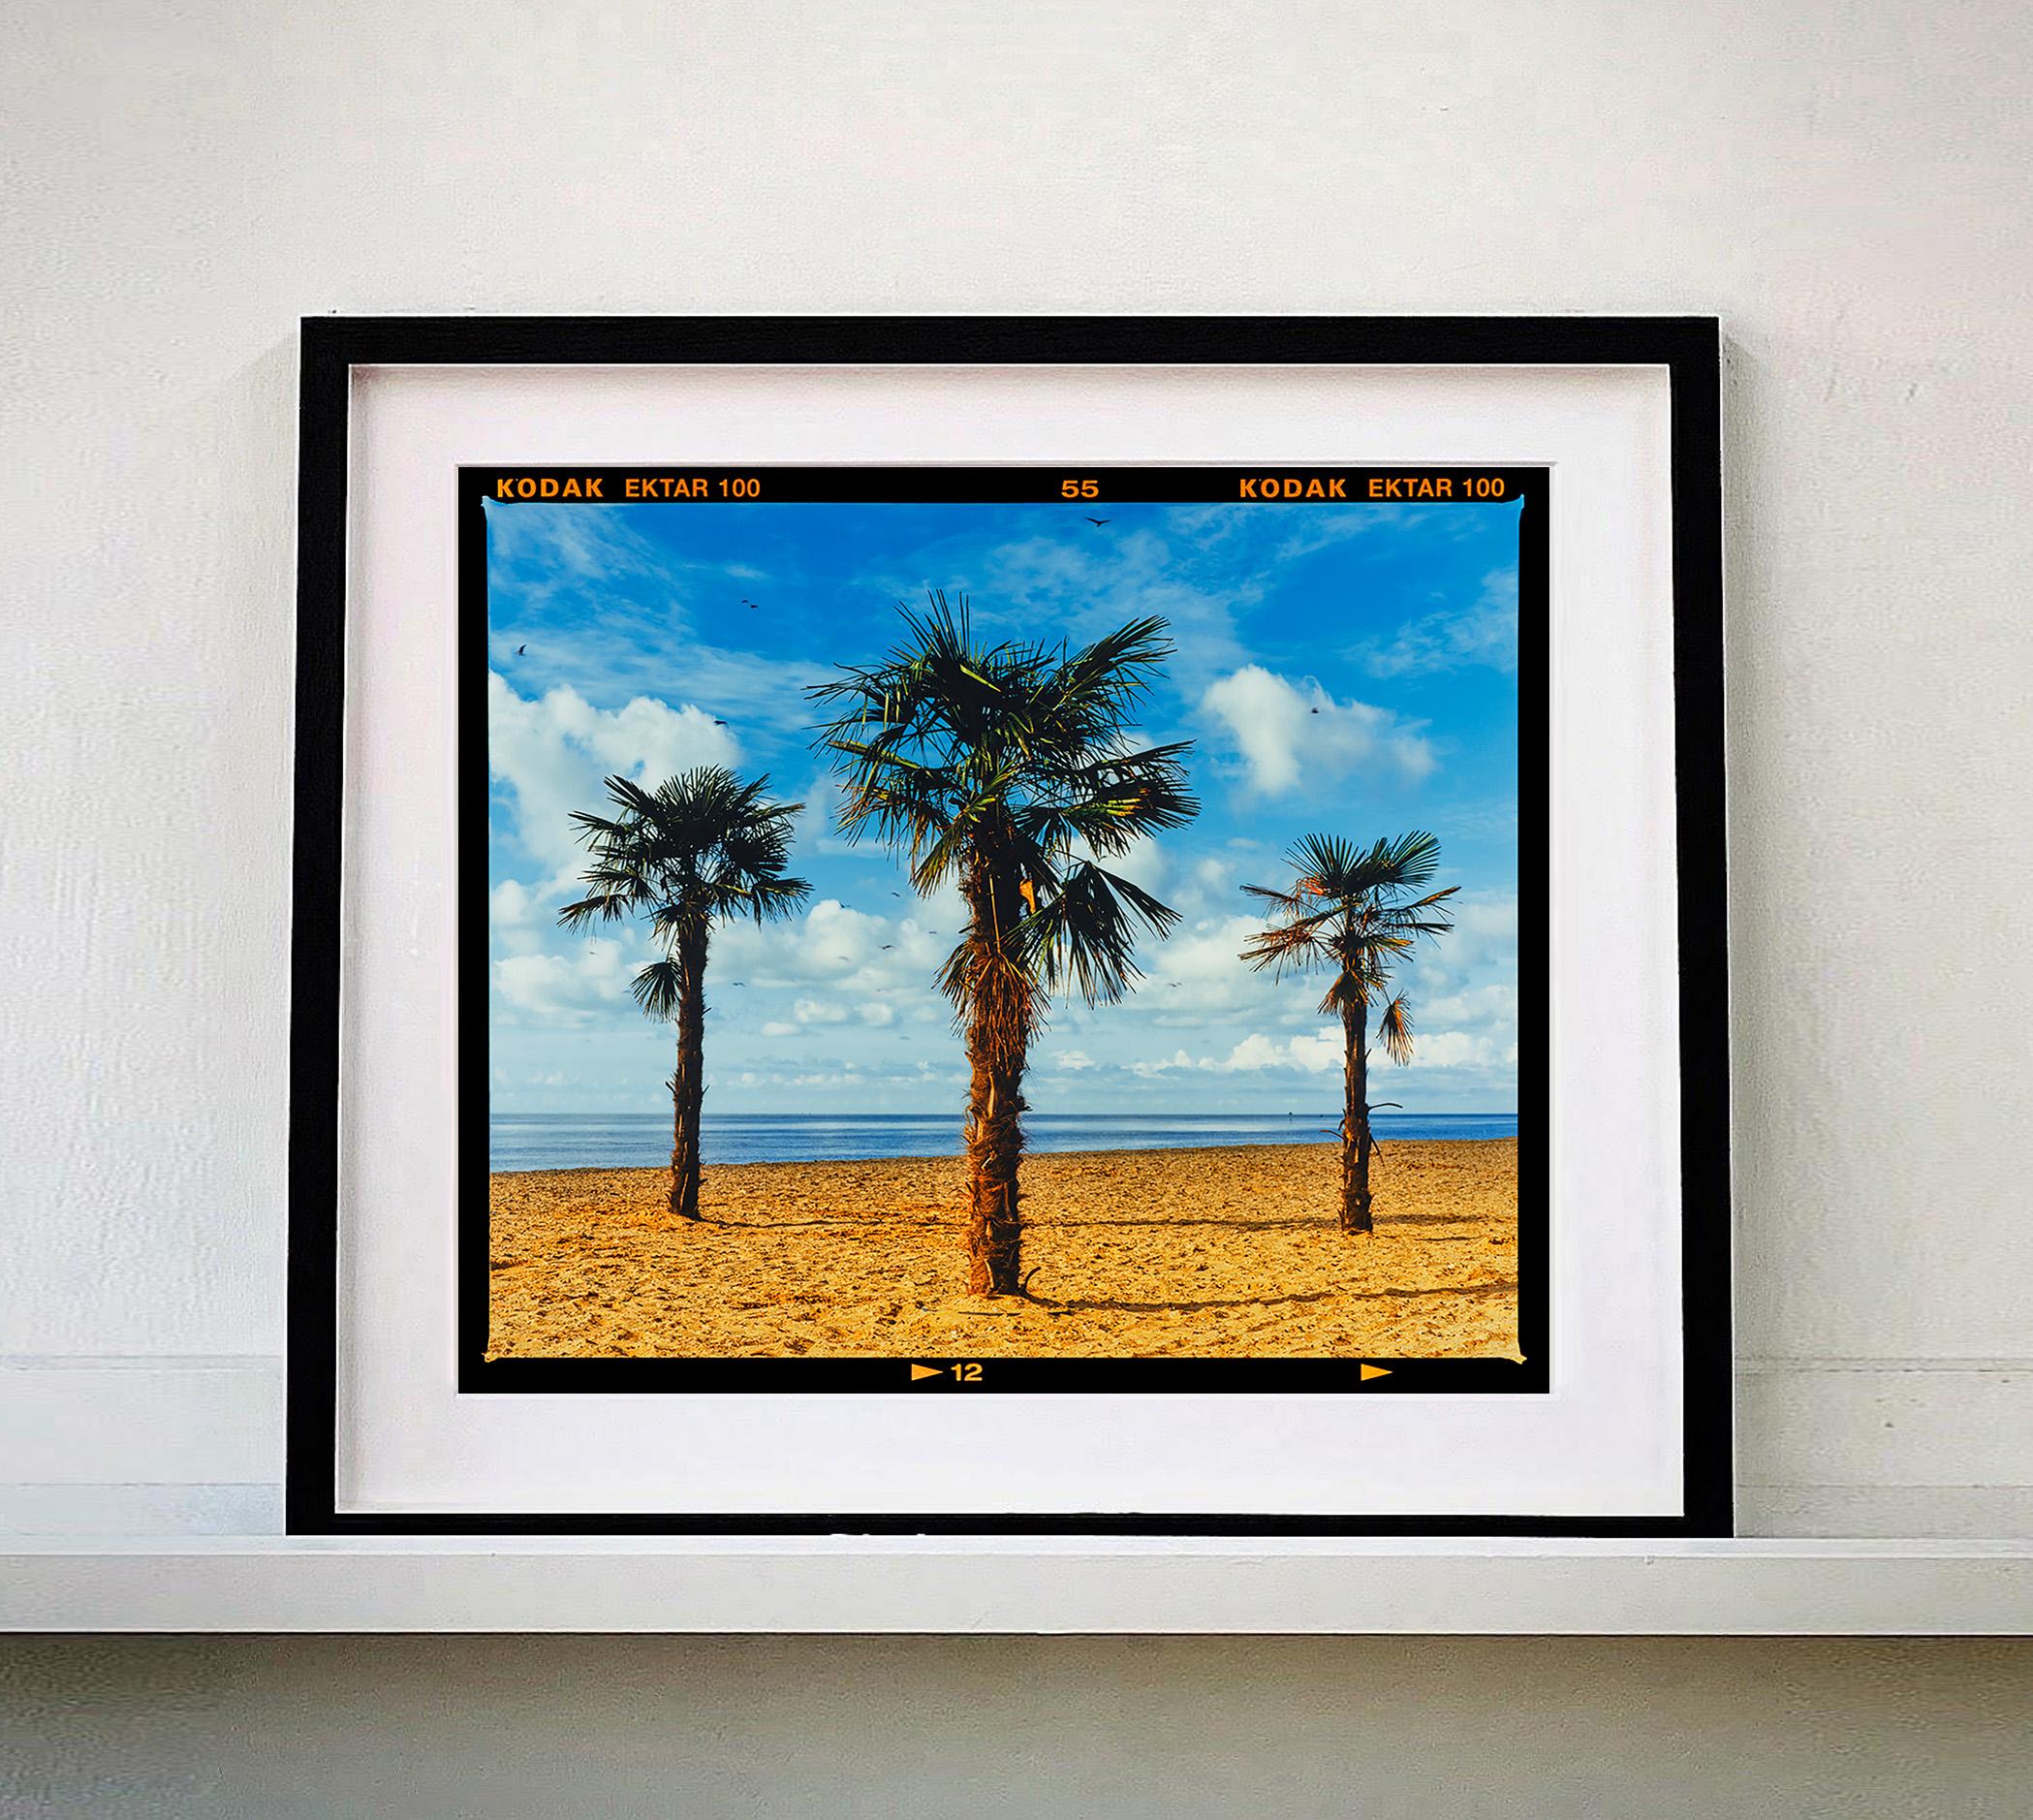 'Three Palms' from Richard Heeps Great British staycation series, On-Sea. Taken in Clacton-on-Sea, Richard was channeling Hitchcock in his mind. He printed in his darkroom full frame with the Kodak film rebate which adds another dimension to this